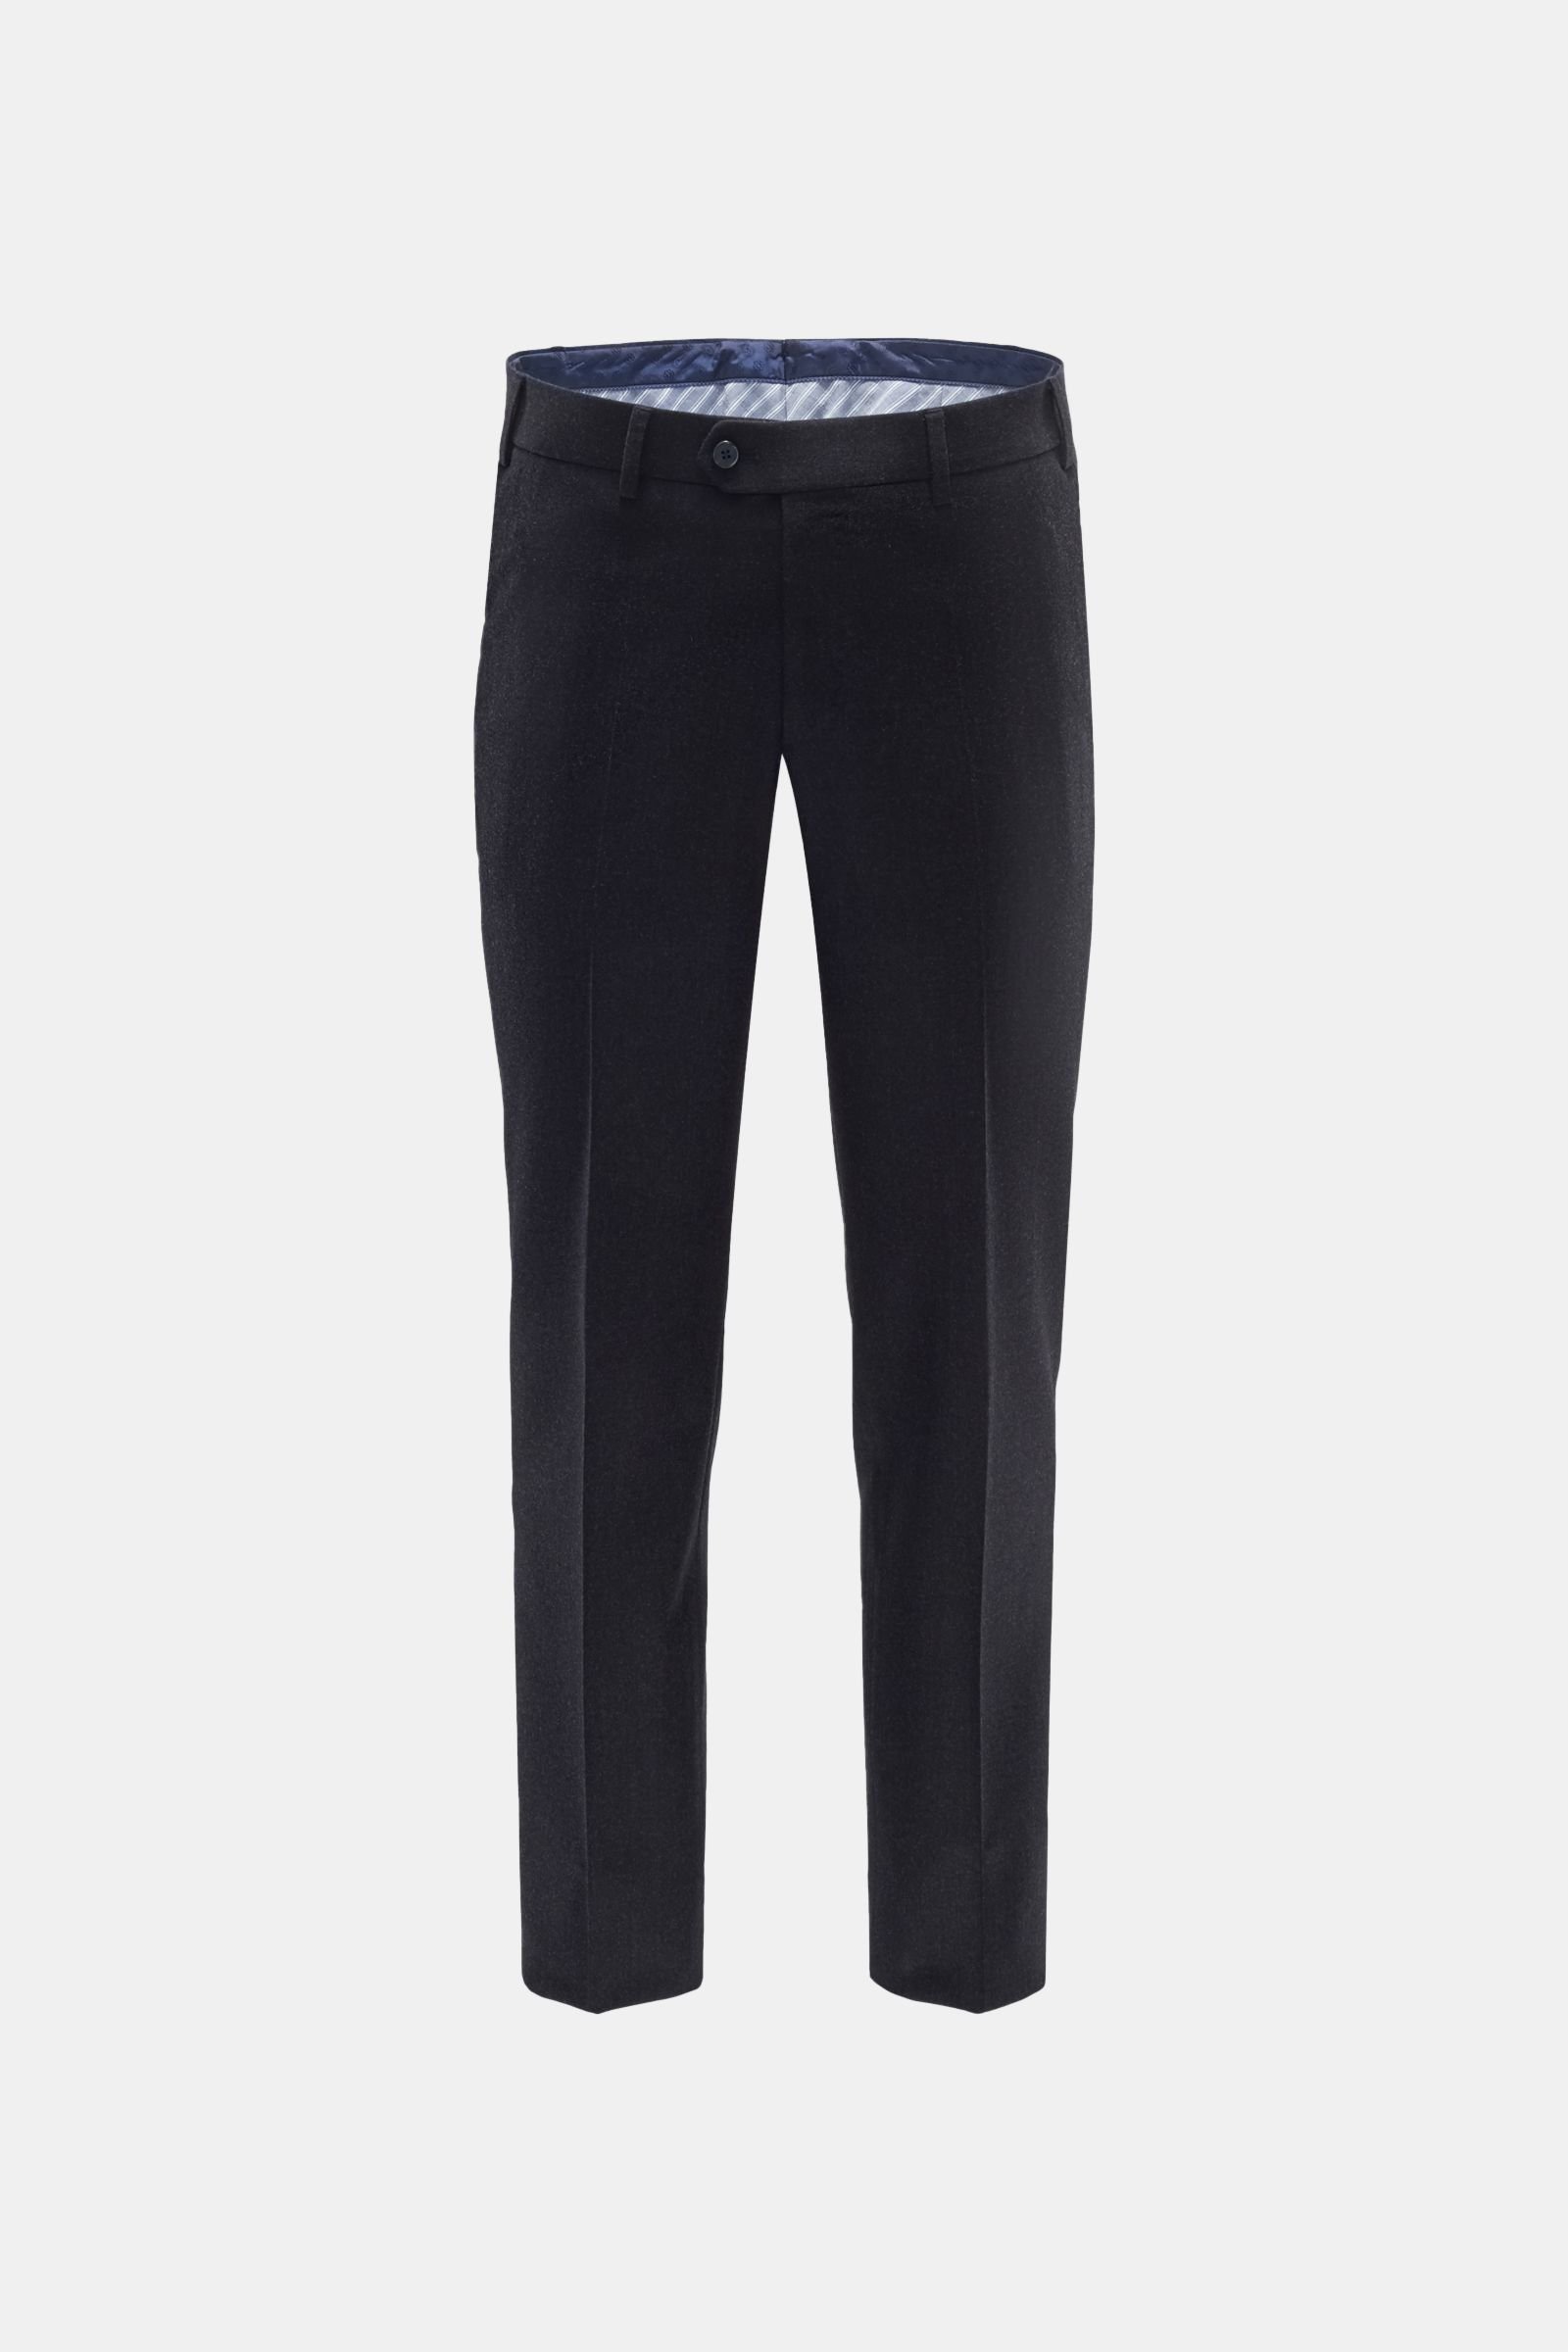 Wool trousers 'Perfetto' black